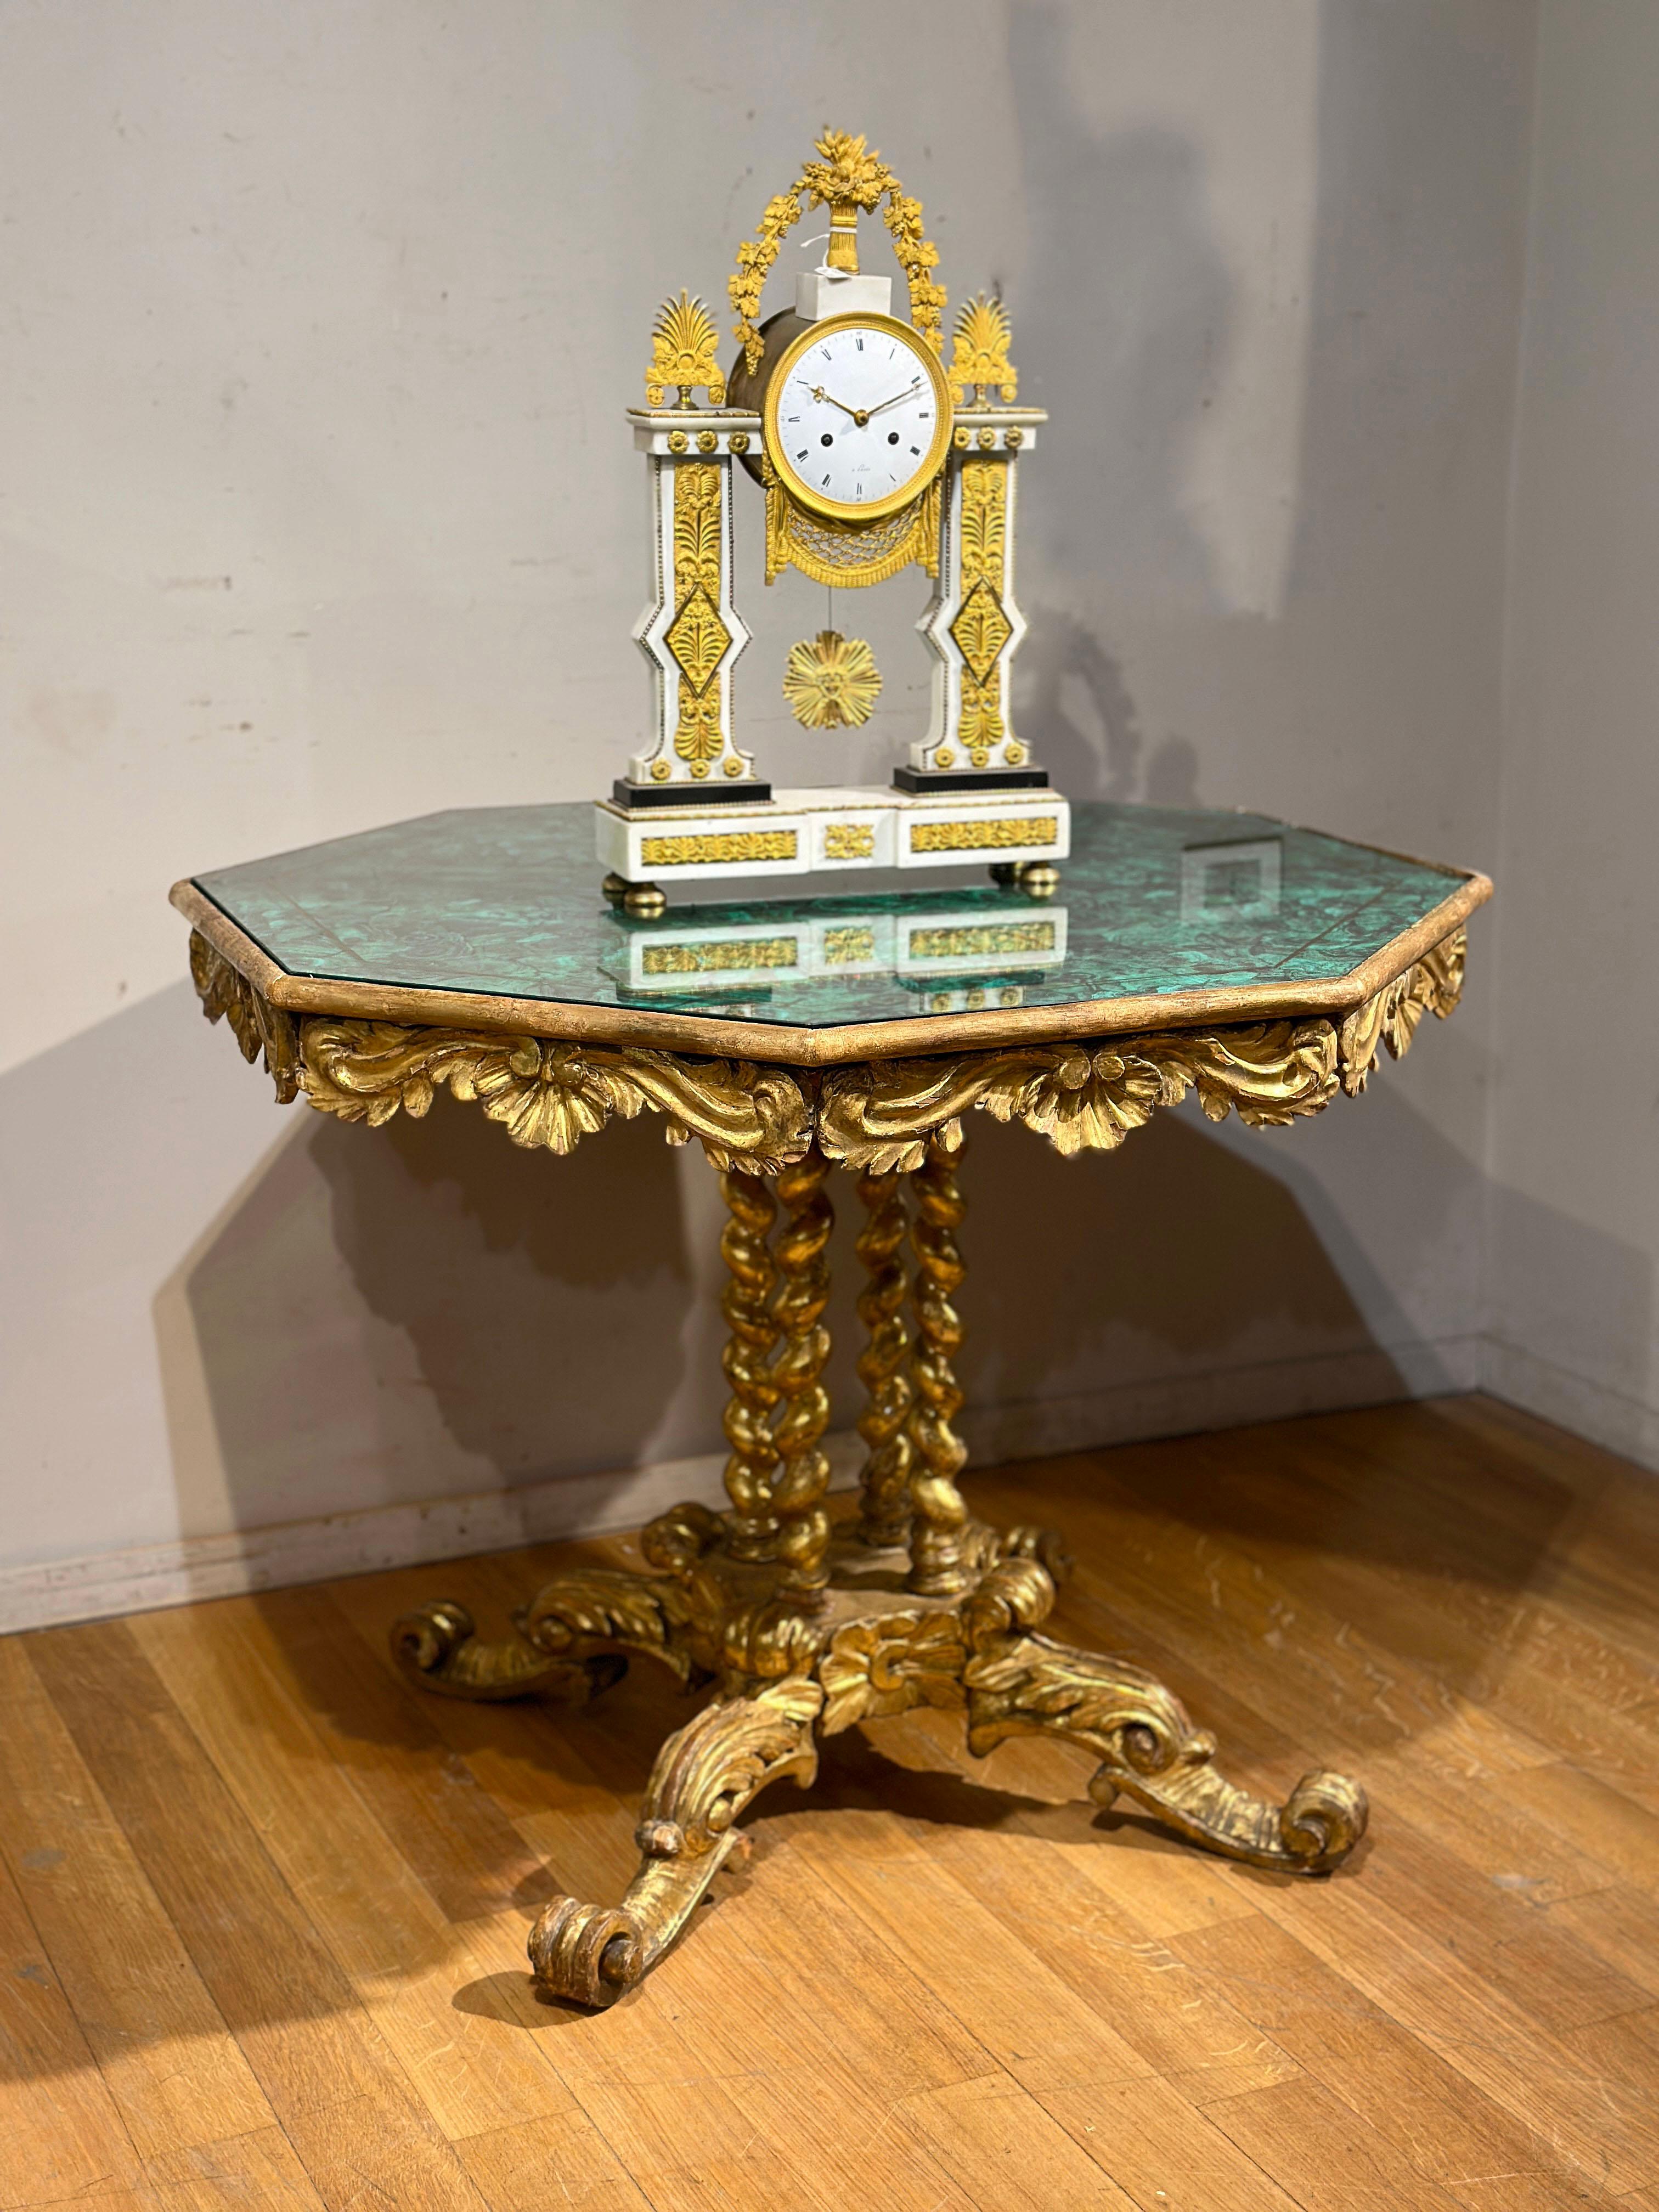 EARLY 19th CENTURY GILDED WOOD TABLE WITH SIMILAR MALACHITE FABRIC im Angebot 3